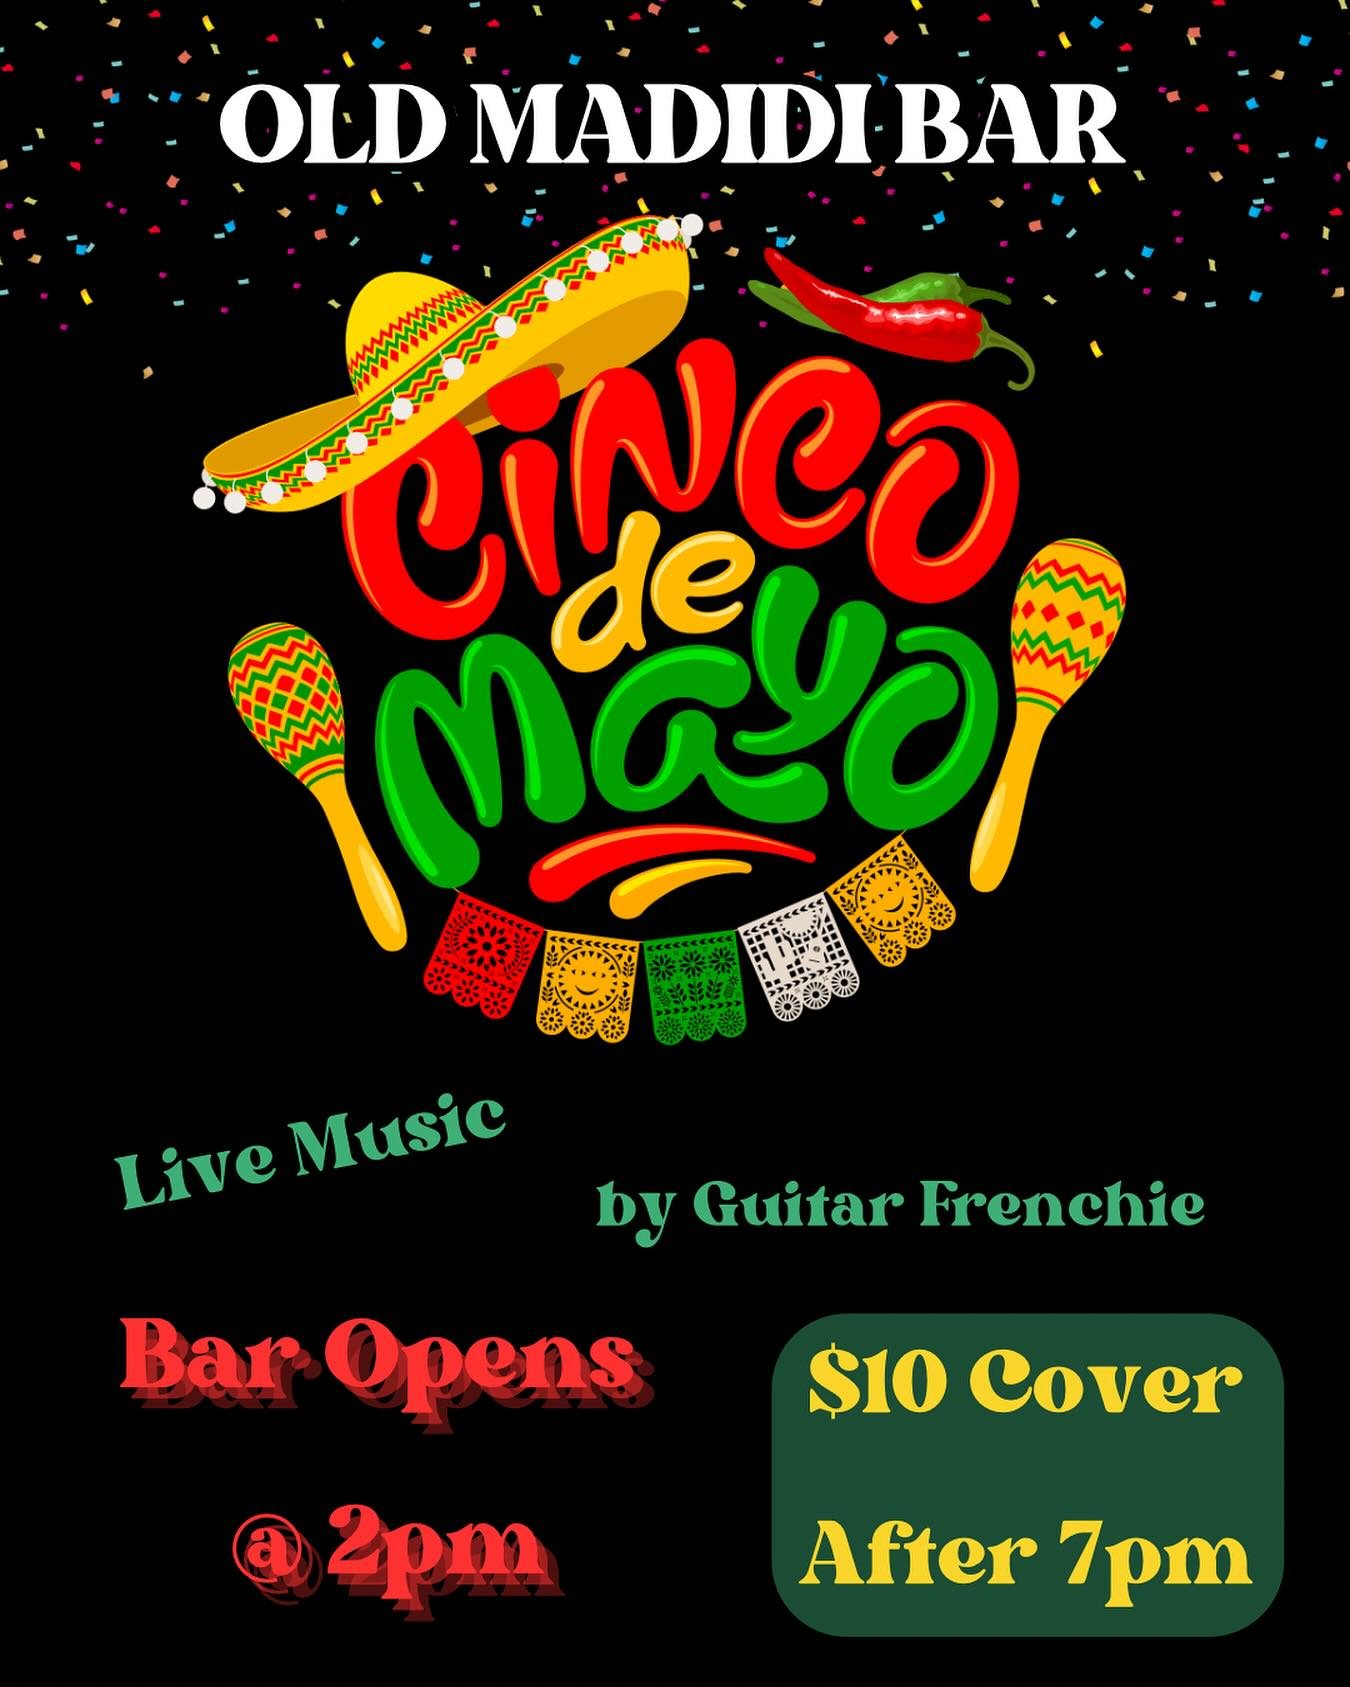 Arriba arriba!  Come join us at the Old Madidi Bar today for Music and Margs.  Bar opens at 2.  Music and cover starts at 7pm. @guitarfrenchie #visitclarksdale #visitms #cincodemayo @visit_clarksdale